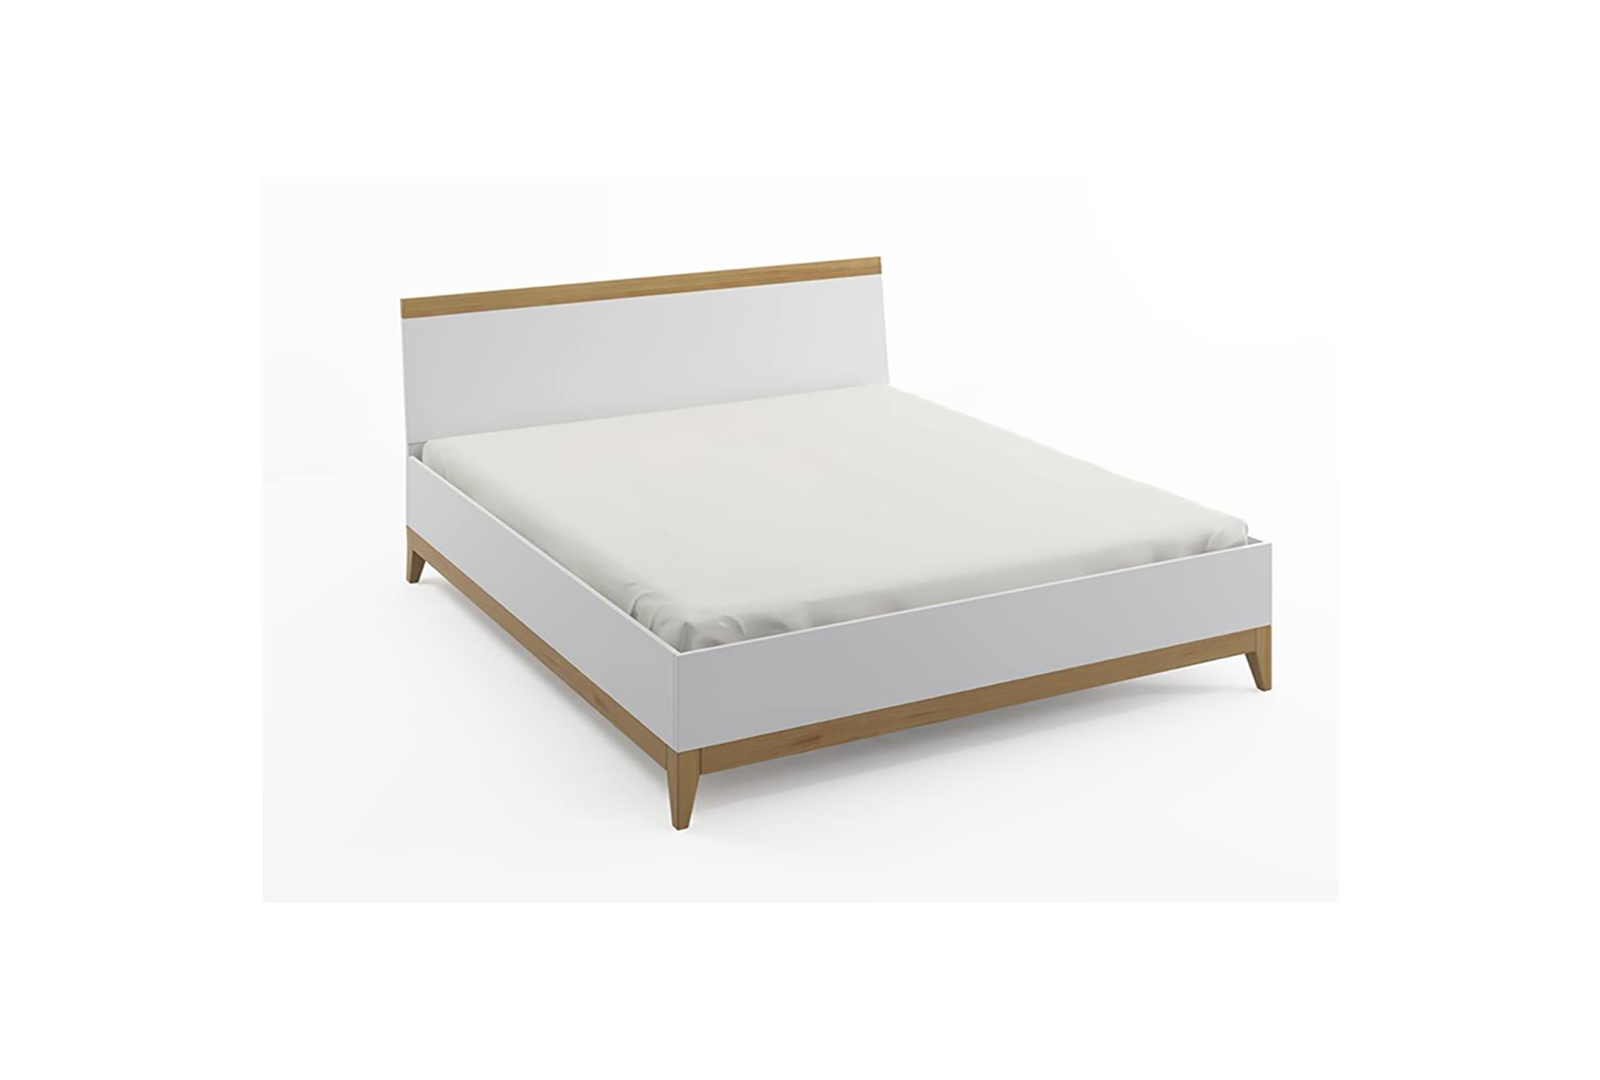 VISBY LIVIA BC WOODEN BED WITH A BOX FOR BEDDING